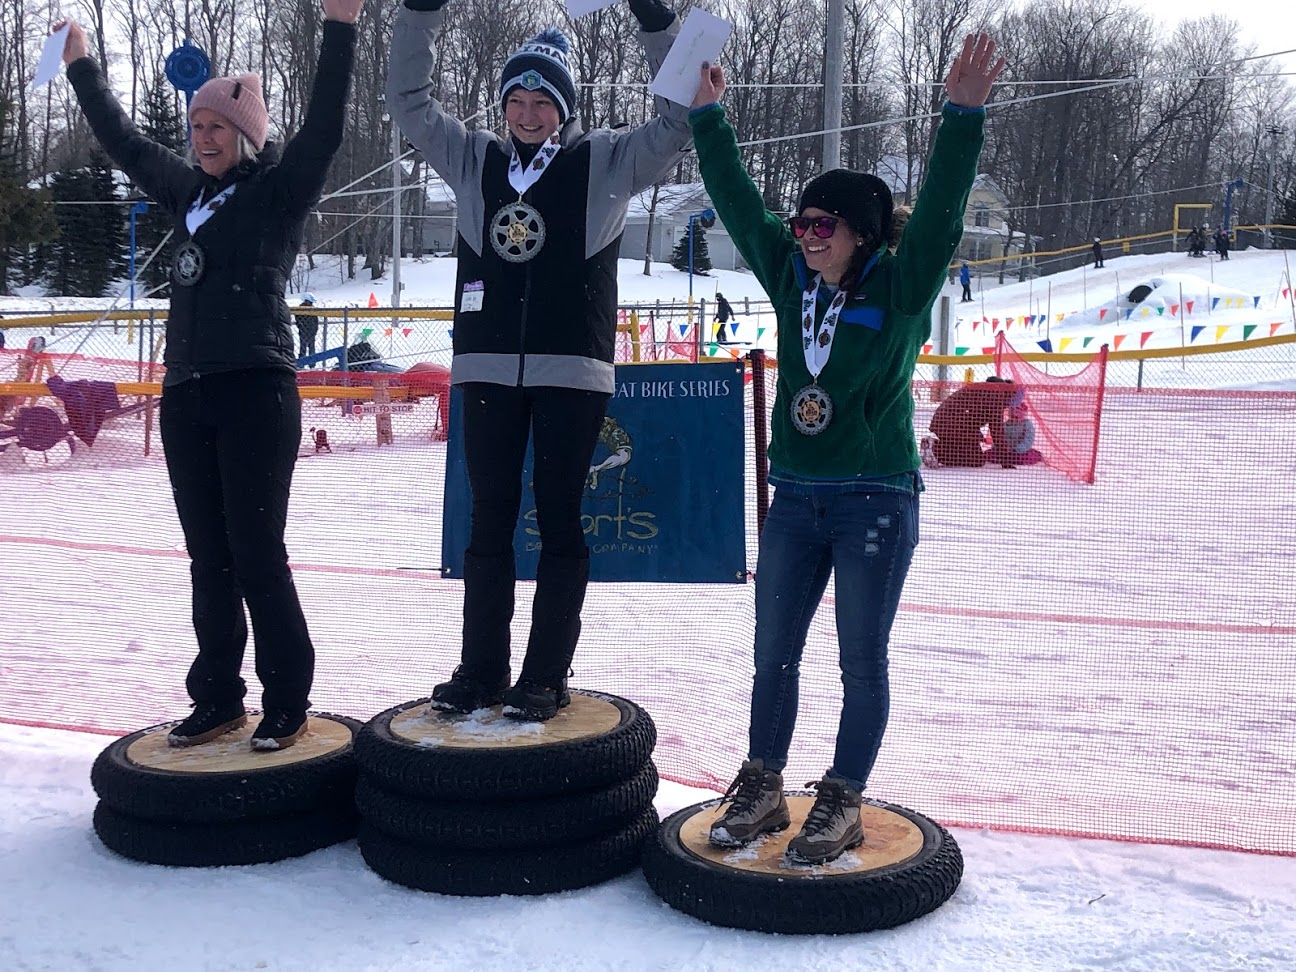 Podium Picture of three women after a fat bike snow race